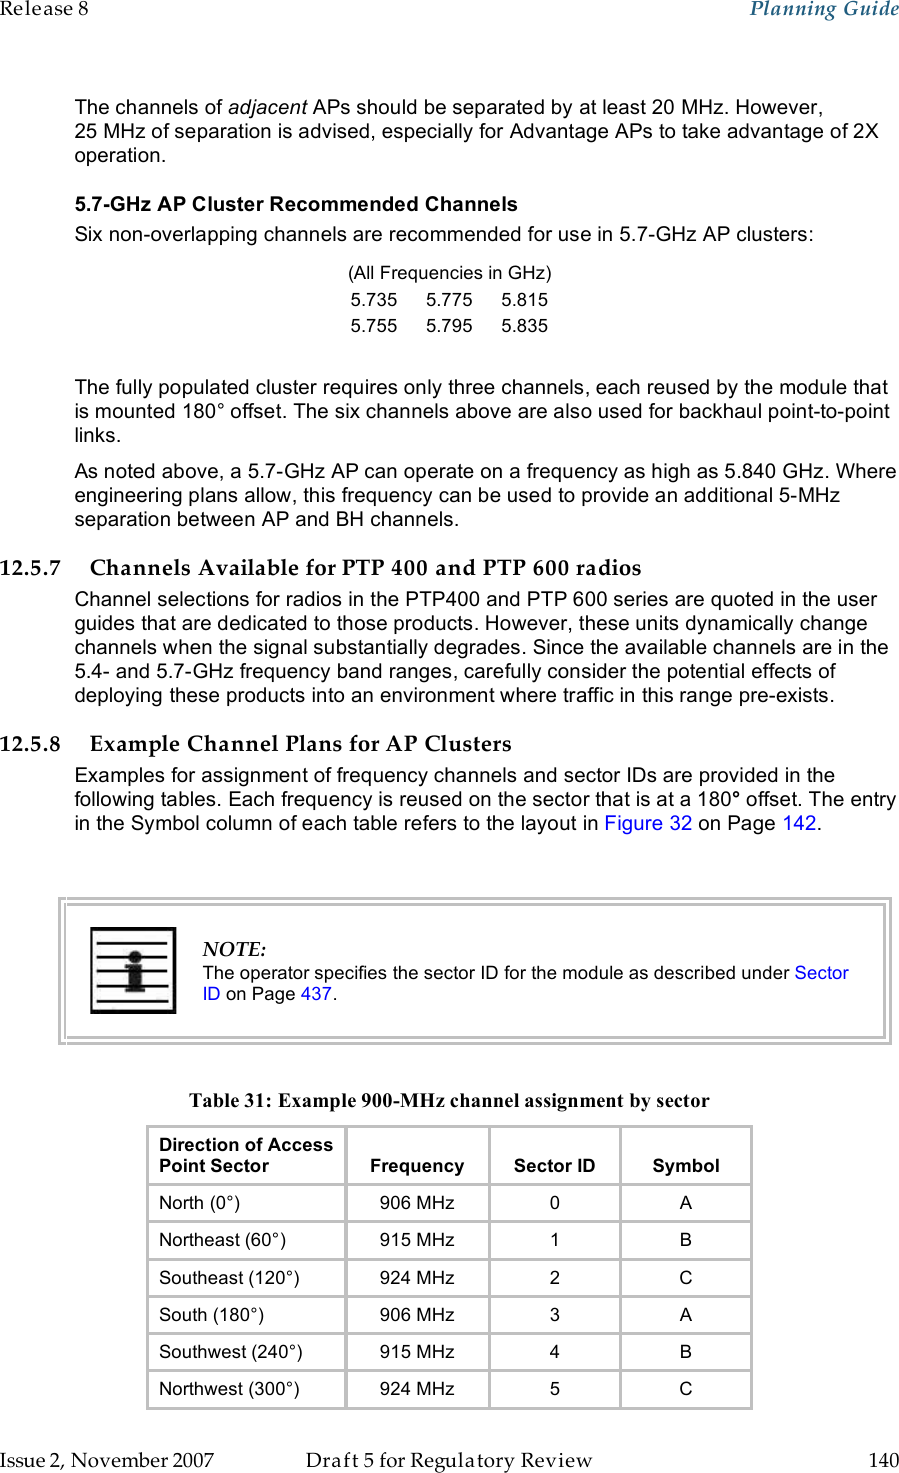 Release 8    Planning Guide                  March 200                  Through Software Release 6.   Issue 2, November 2007  Draft 5 for Regulatory Review  140     The channels of adjacent APs should be separated by at least 20 MHz. However,  25 MHz of separation is advised, especially for Advantage APs to take advantage of 2X operation. 5.7-GHz AP Cluster Recommended Channels Six non-overlapping channels are recommended for use in 5.7-GHz AP clusters: (All Frequencies in GHz) 5.735 5.775 5.815 5.755 5.795 5.835  The fully populated cluster requires only three channels, each reused by the module that is mounted 180° offset. The six channels above are also used for backhaul point-to-point links. As noted above, a 5.7-GHz AP can operate on a frequency as high as 5.840 GHz. Where engineering plans allow, this frequency can be used to provide an additional 5-MHz separation between AP and BH channels. 12.5.7 Channels Available for PTP 400 and PTP 600 radios Channel selections for radios in the PTP400 and PTP 600 series are quoted in the user guides that are dedicated to those products. However, these units dynamically change channels when the signal substantially degrades. Since the available channels are in the 5.4- and 5.7-GHz frequency band ranges, carefully consider the potential effects of deploying these products into an environment where traffic in this range pre-exists. 12.5.8 Example Channel Plans for AP Clusters Examples for assignment of frequency channels and sector IDs are provided in the following tables. Each frequency is reused on the sector that is at a 180° offset. The entry in the Symbol column of each table refers to the layout in Figure 32 on Page 142.   NOTE: The operator specifies the sector ID for the module as described under Sector ID on Page 437.  Table 31: Example 900-MHz channel assignment by sector Direction of Access  Point Sector  Frequency  Sector ID  Symbol North (0°)  906 MHz 0 A Northeast (60°)  915 MHz 1 B Southeast (120°) 924 MHz 2 C South (180°)  906 MHz 3 A Southwest (240°) 915 MHz 4 B Northwest (300°)  924 MHz 5 C 